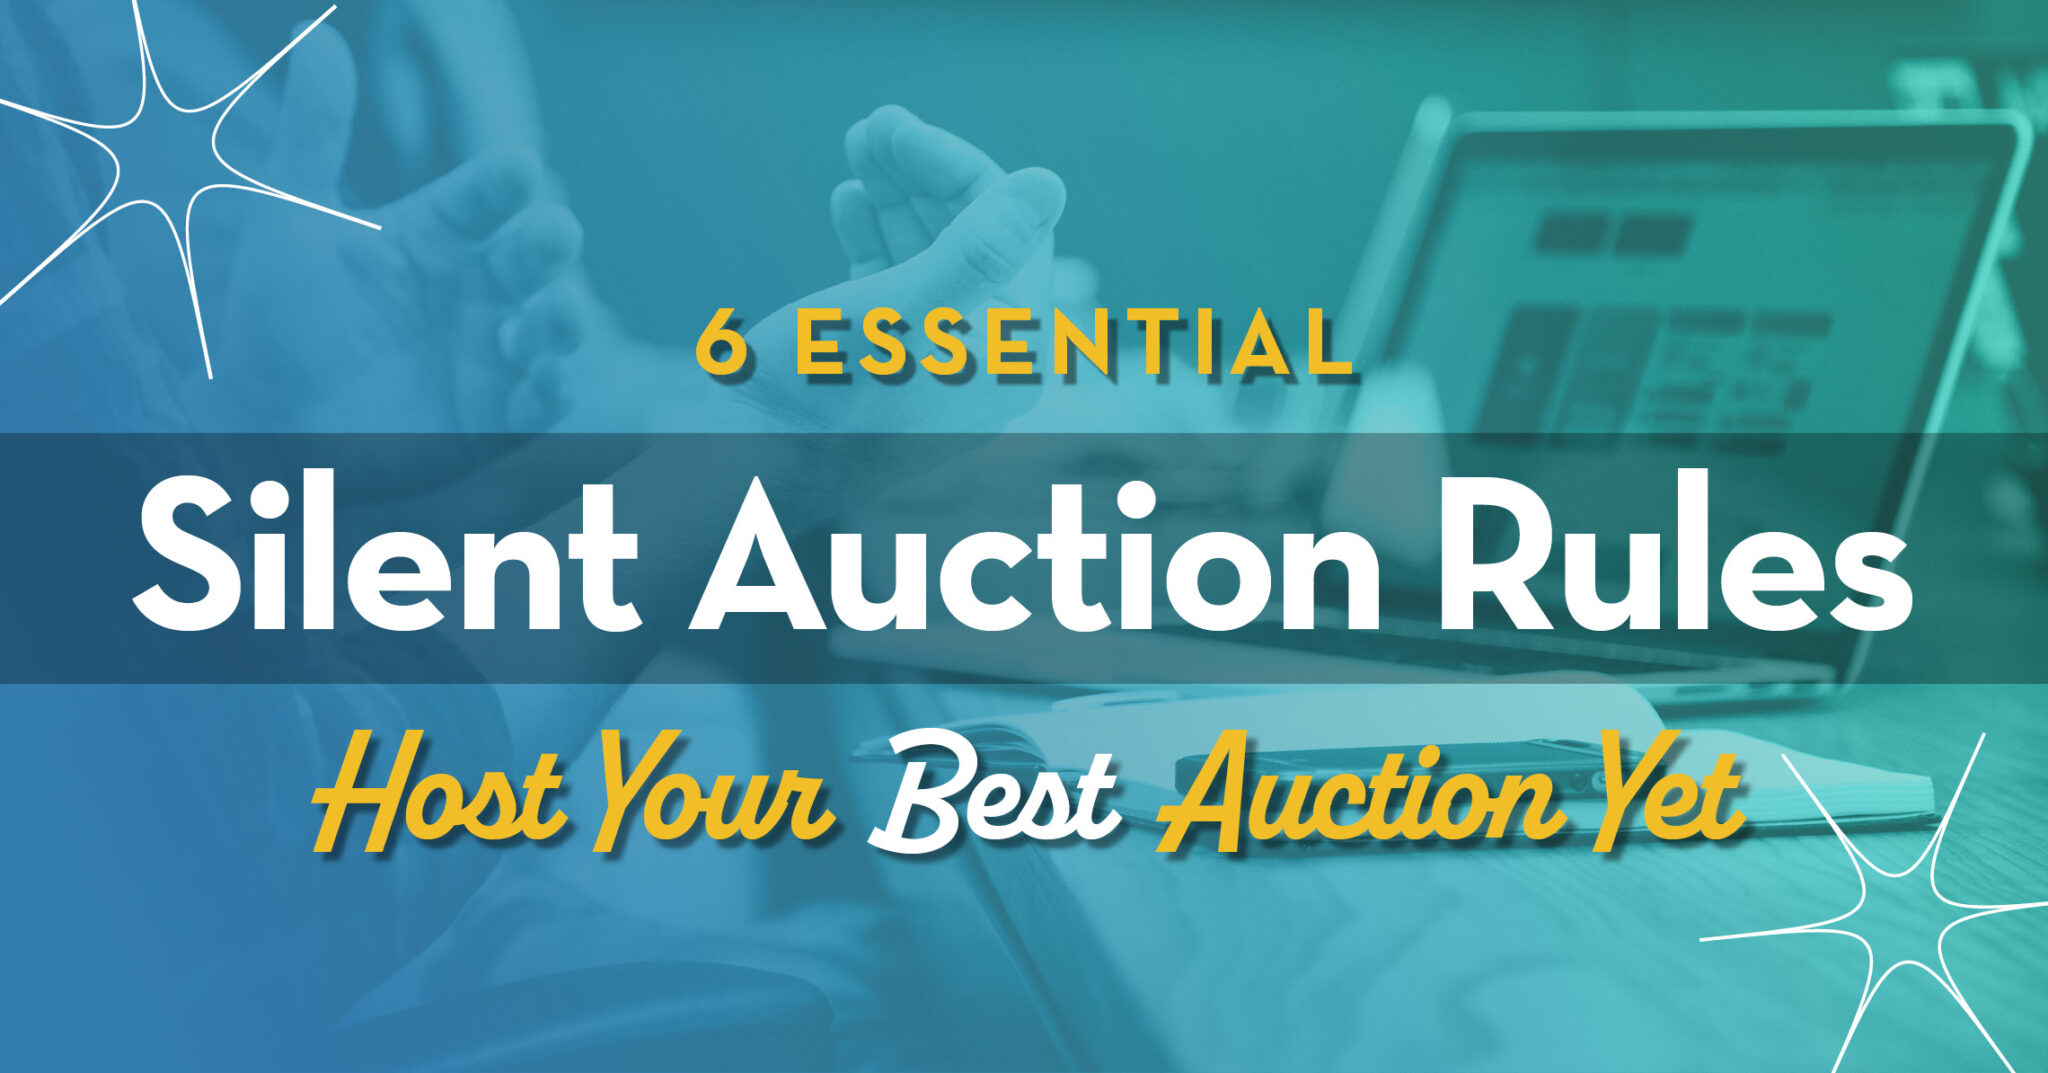 4 Essentials to a Successful Charity Auction (Besides Items for